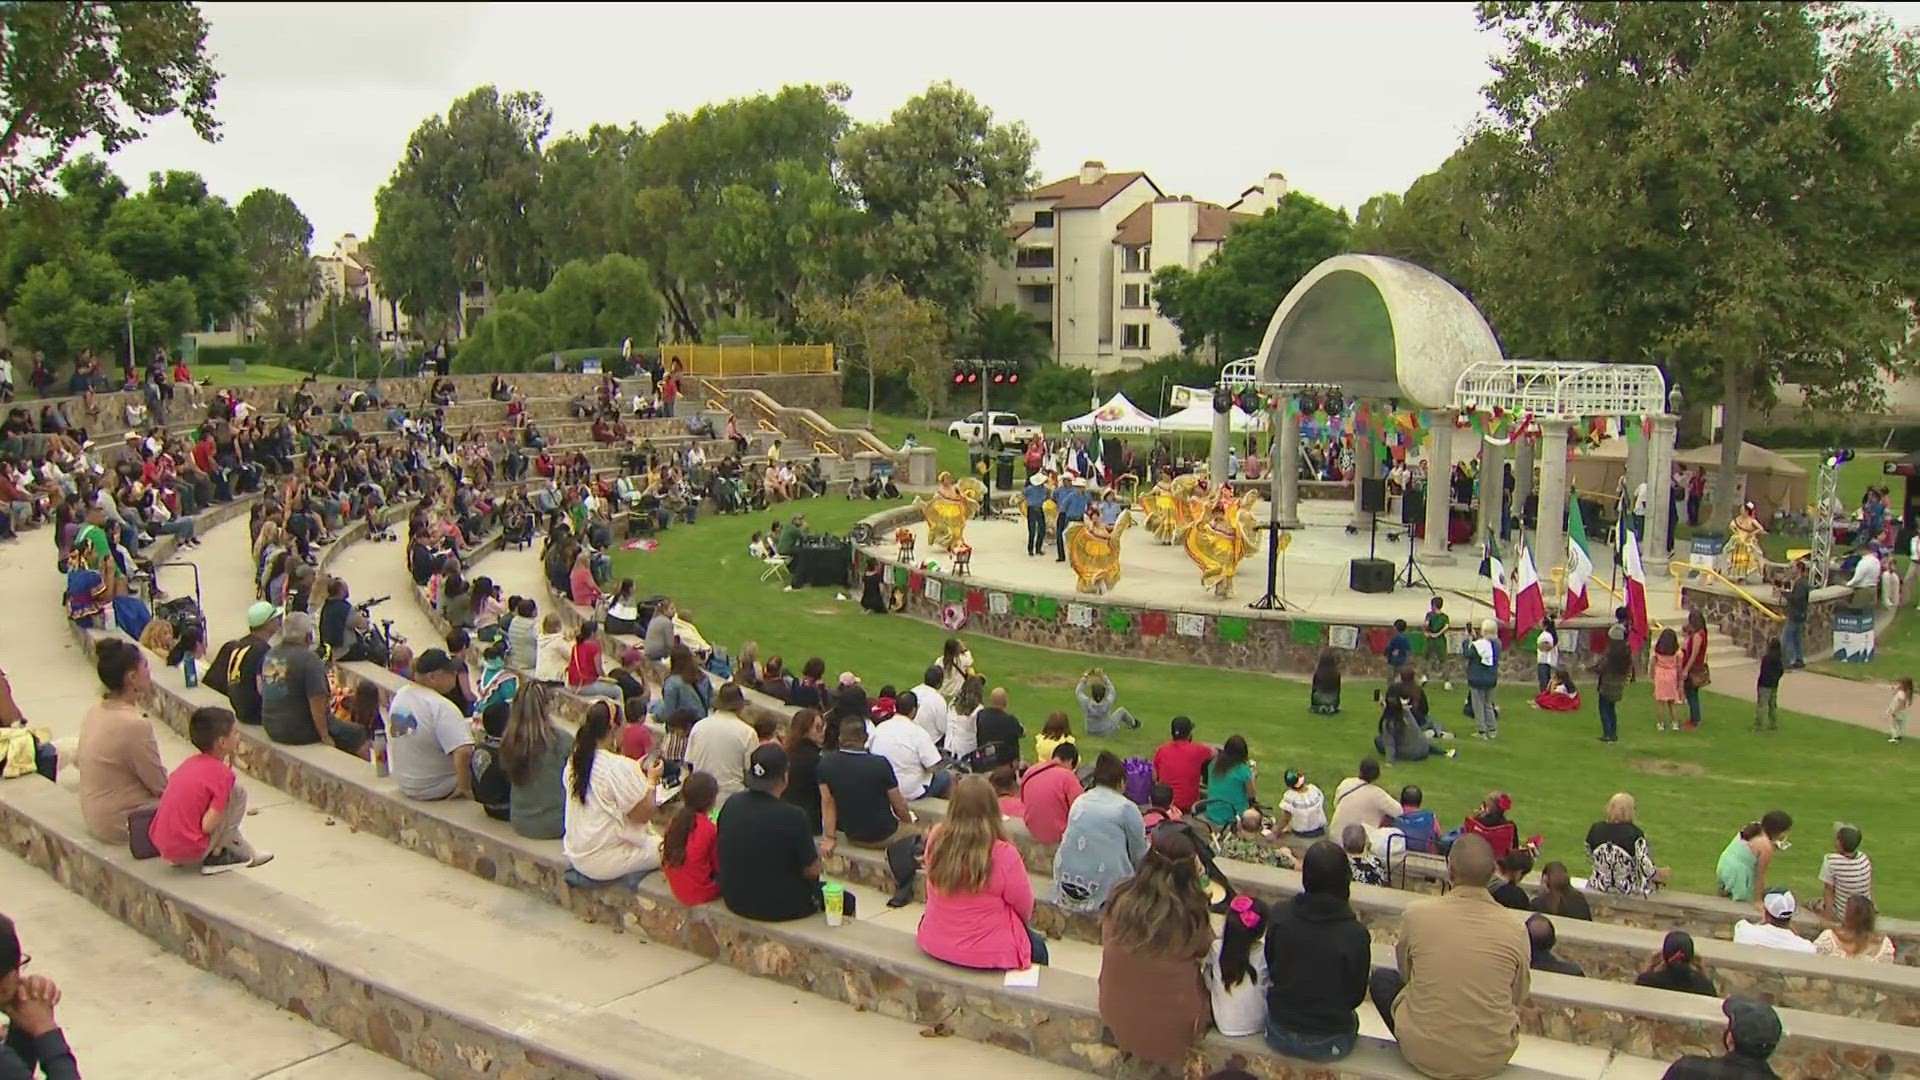 The sound of mariachi and the rhythm of ballet folklorico were present at Memorial Park, one of many celebrations in San Diego for el grito.